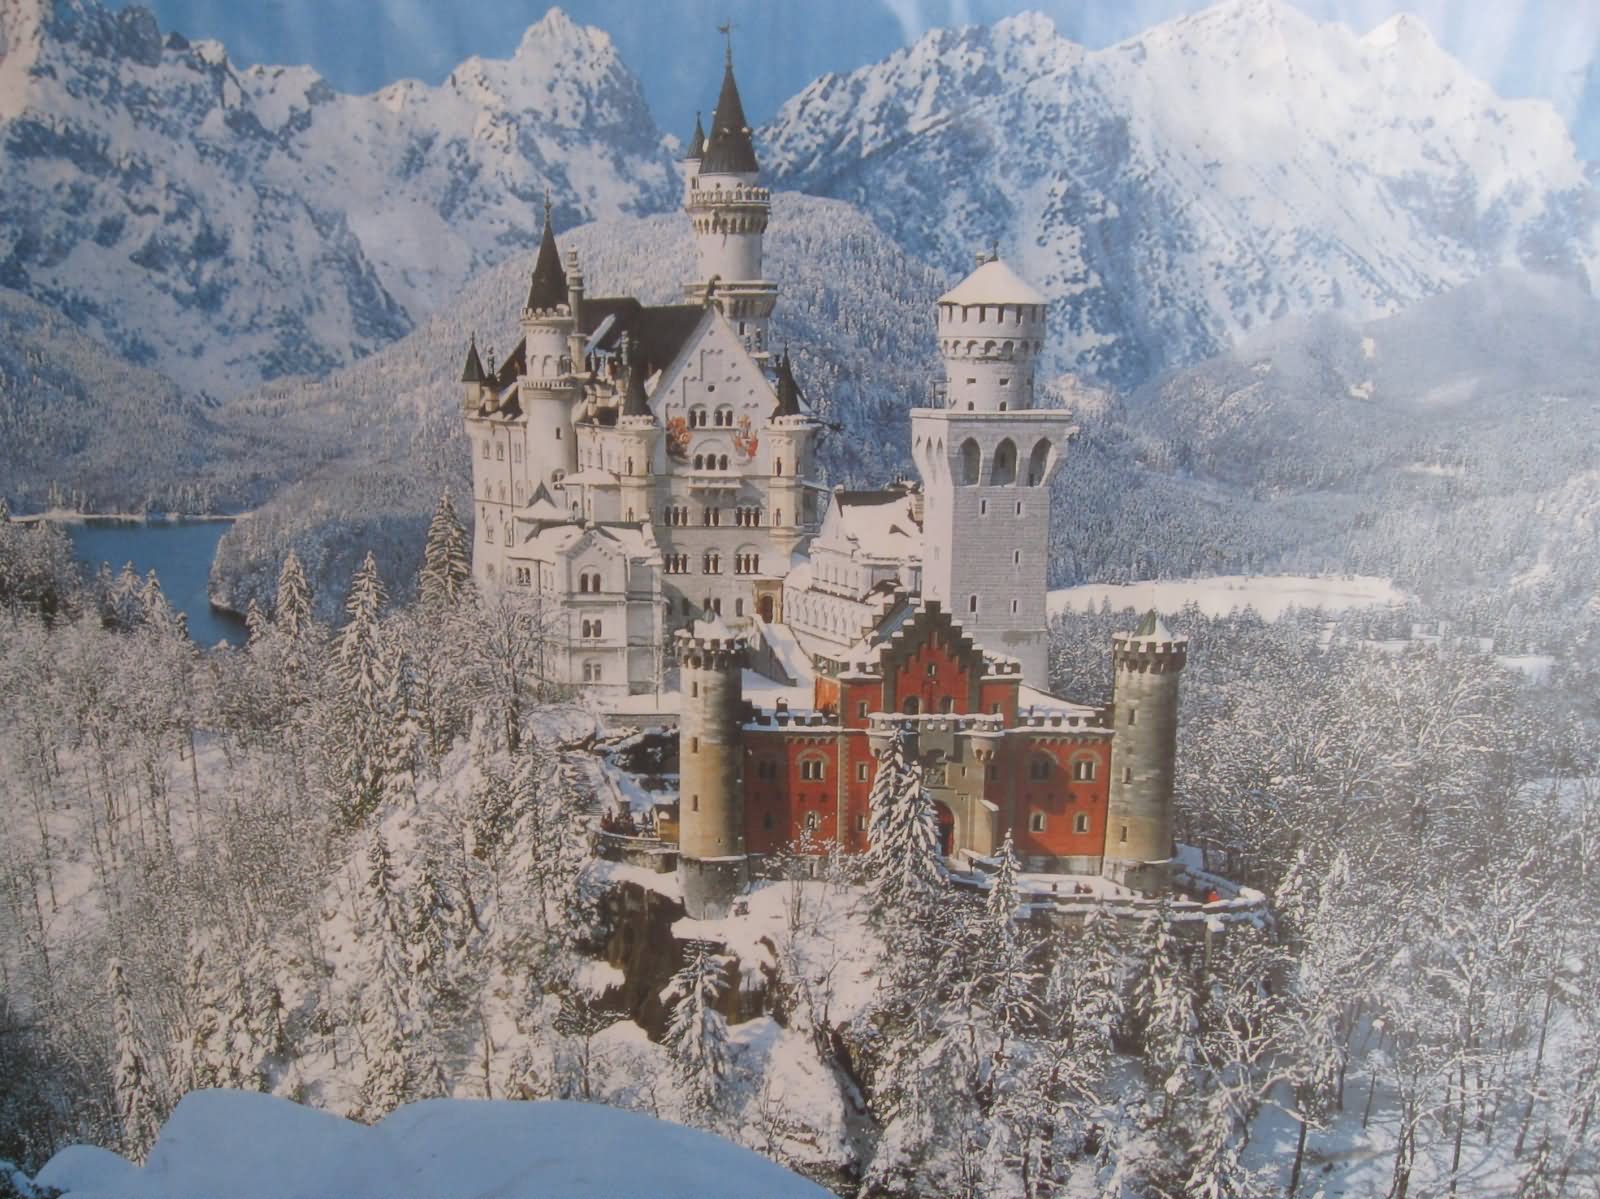 Snow Covered View Of The Neuschwanstein Castle In Germany